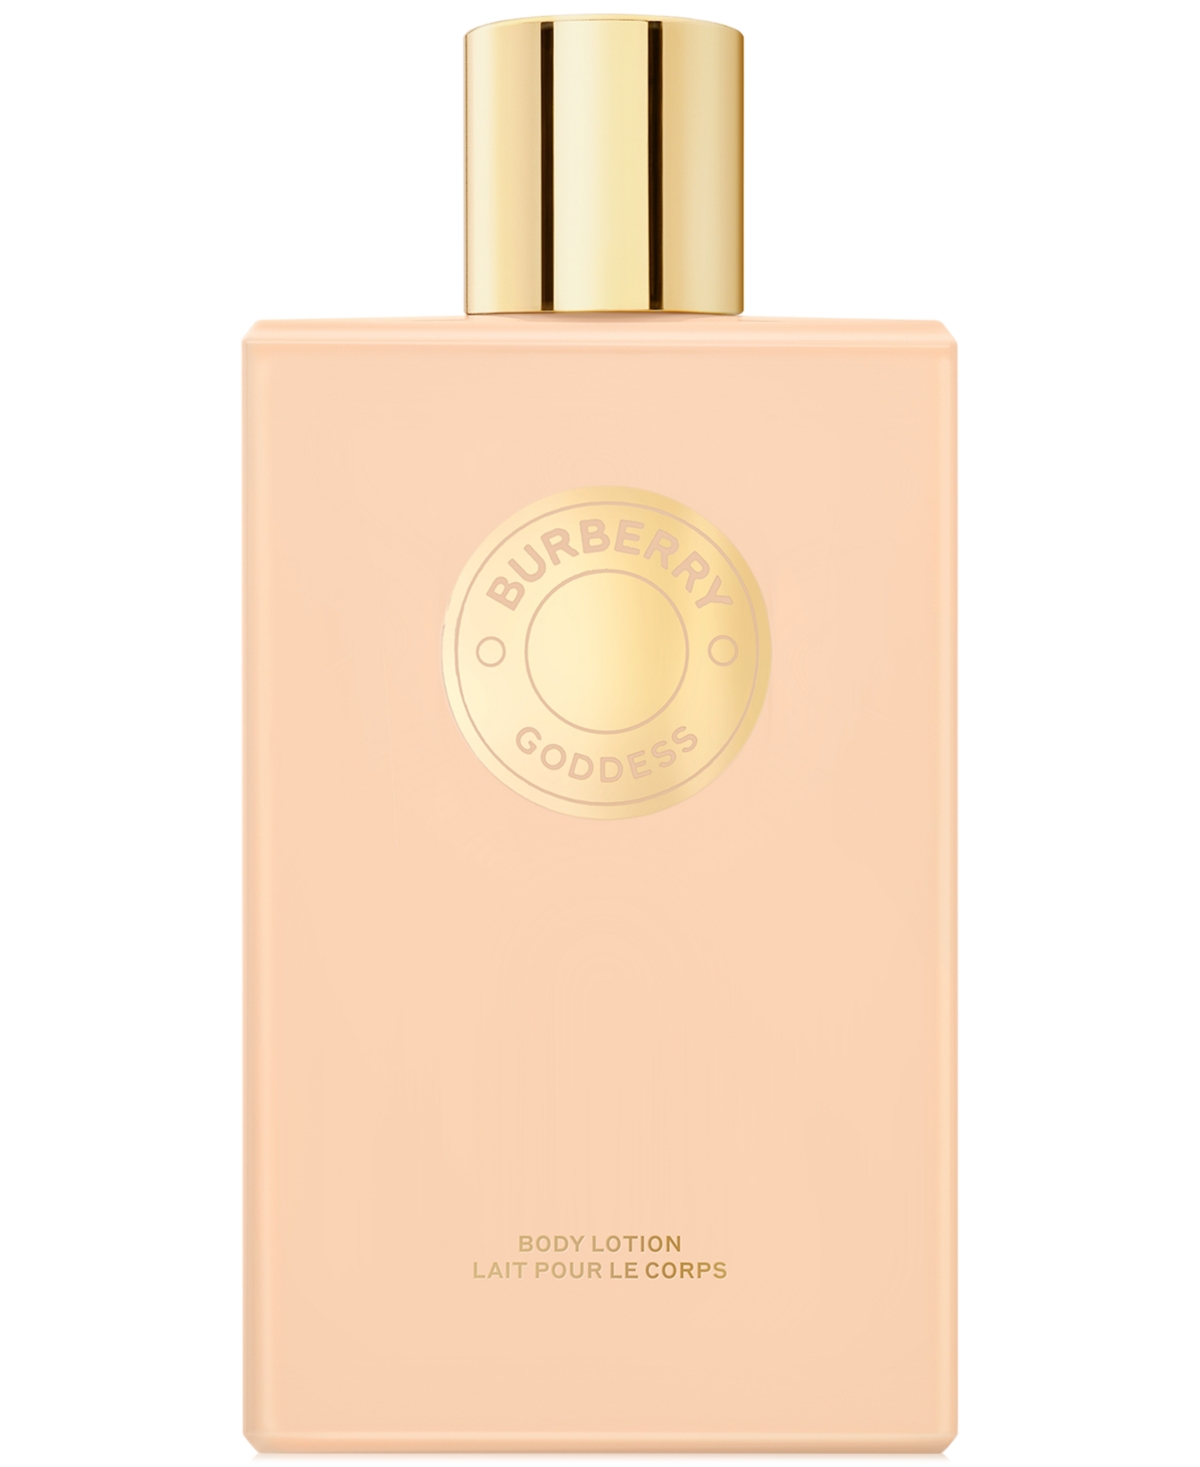 Burberry Goddess Body Lotion, 6.7 Oz. In No Color